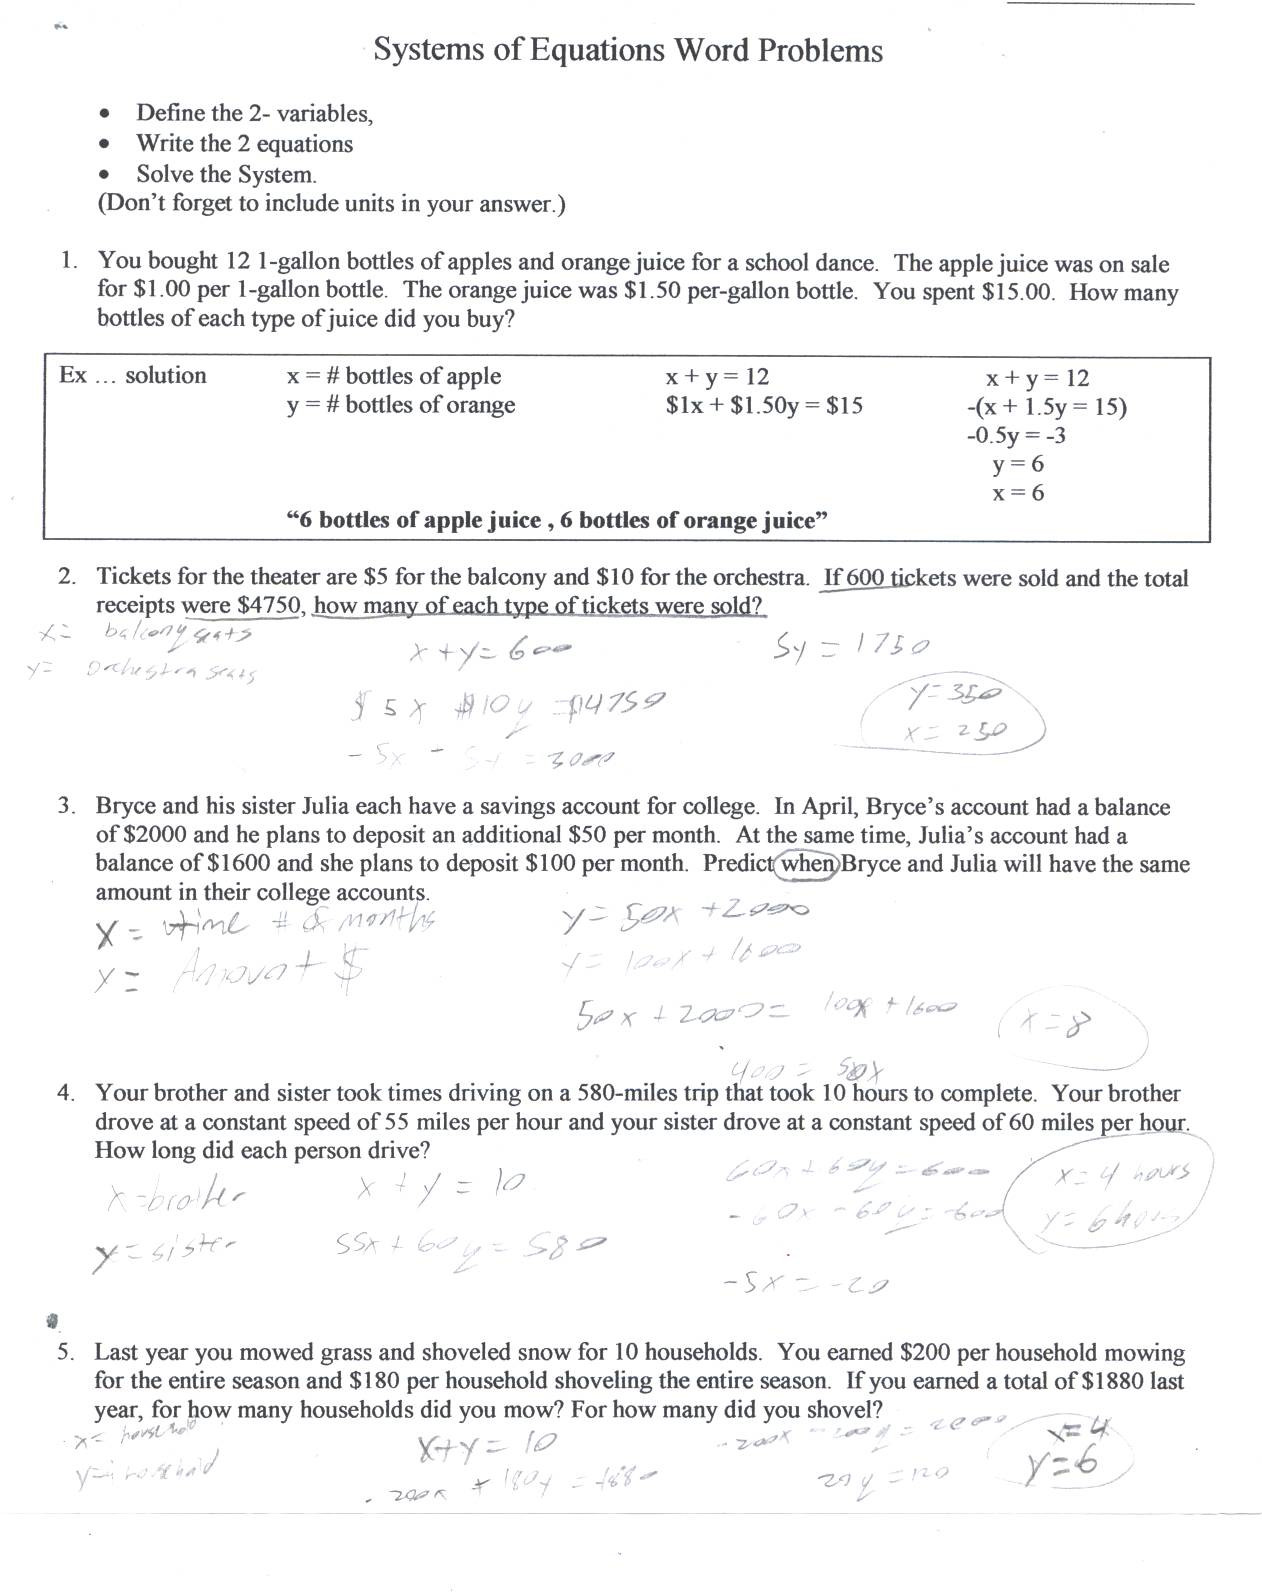 Systems Word Problems Worksheet Linear Equations Word Problems Worksheet Algebra 1